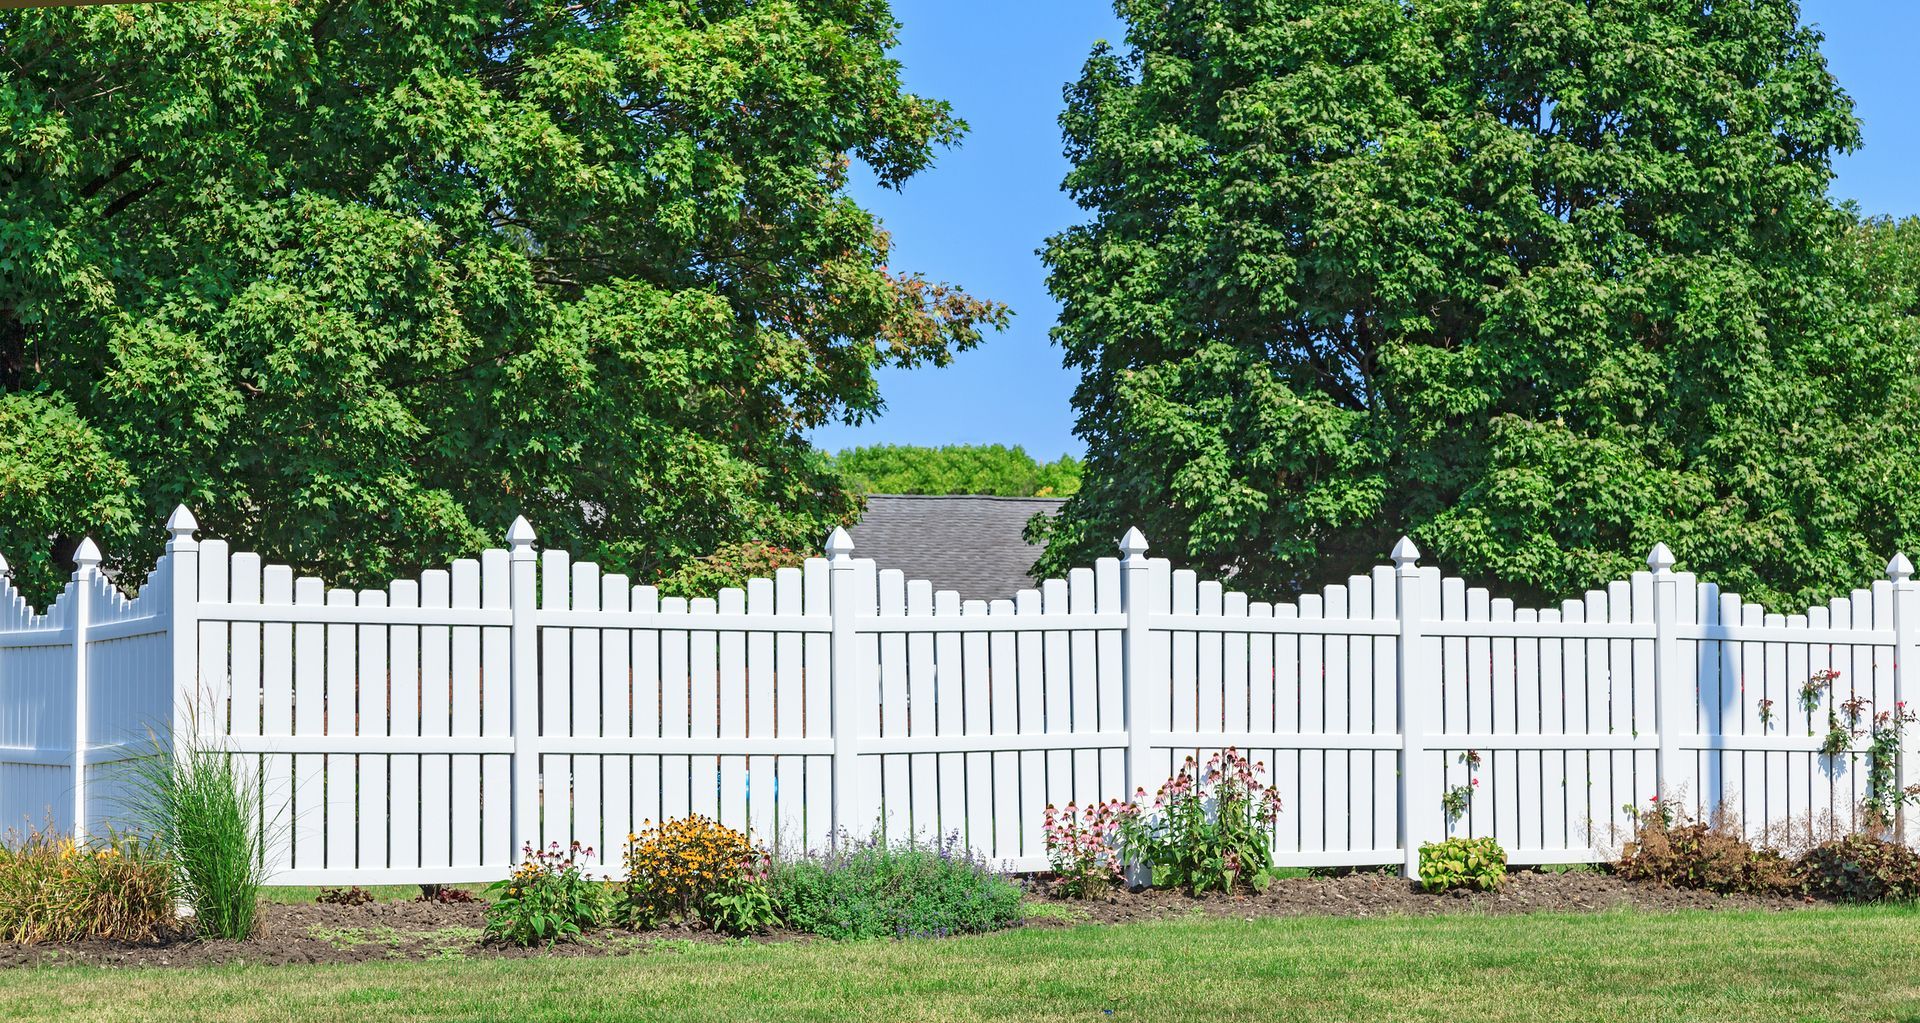 A White Picket Fence Surrounds a Lush Green Yard.